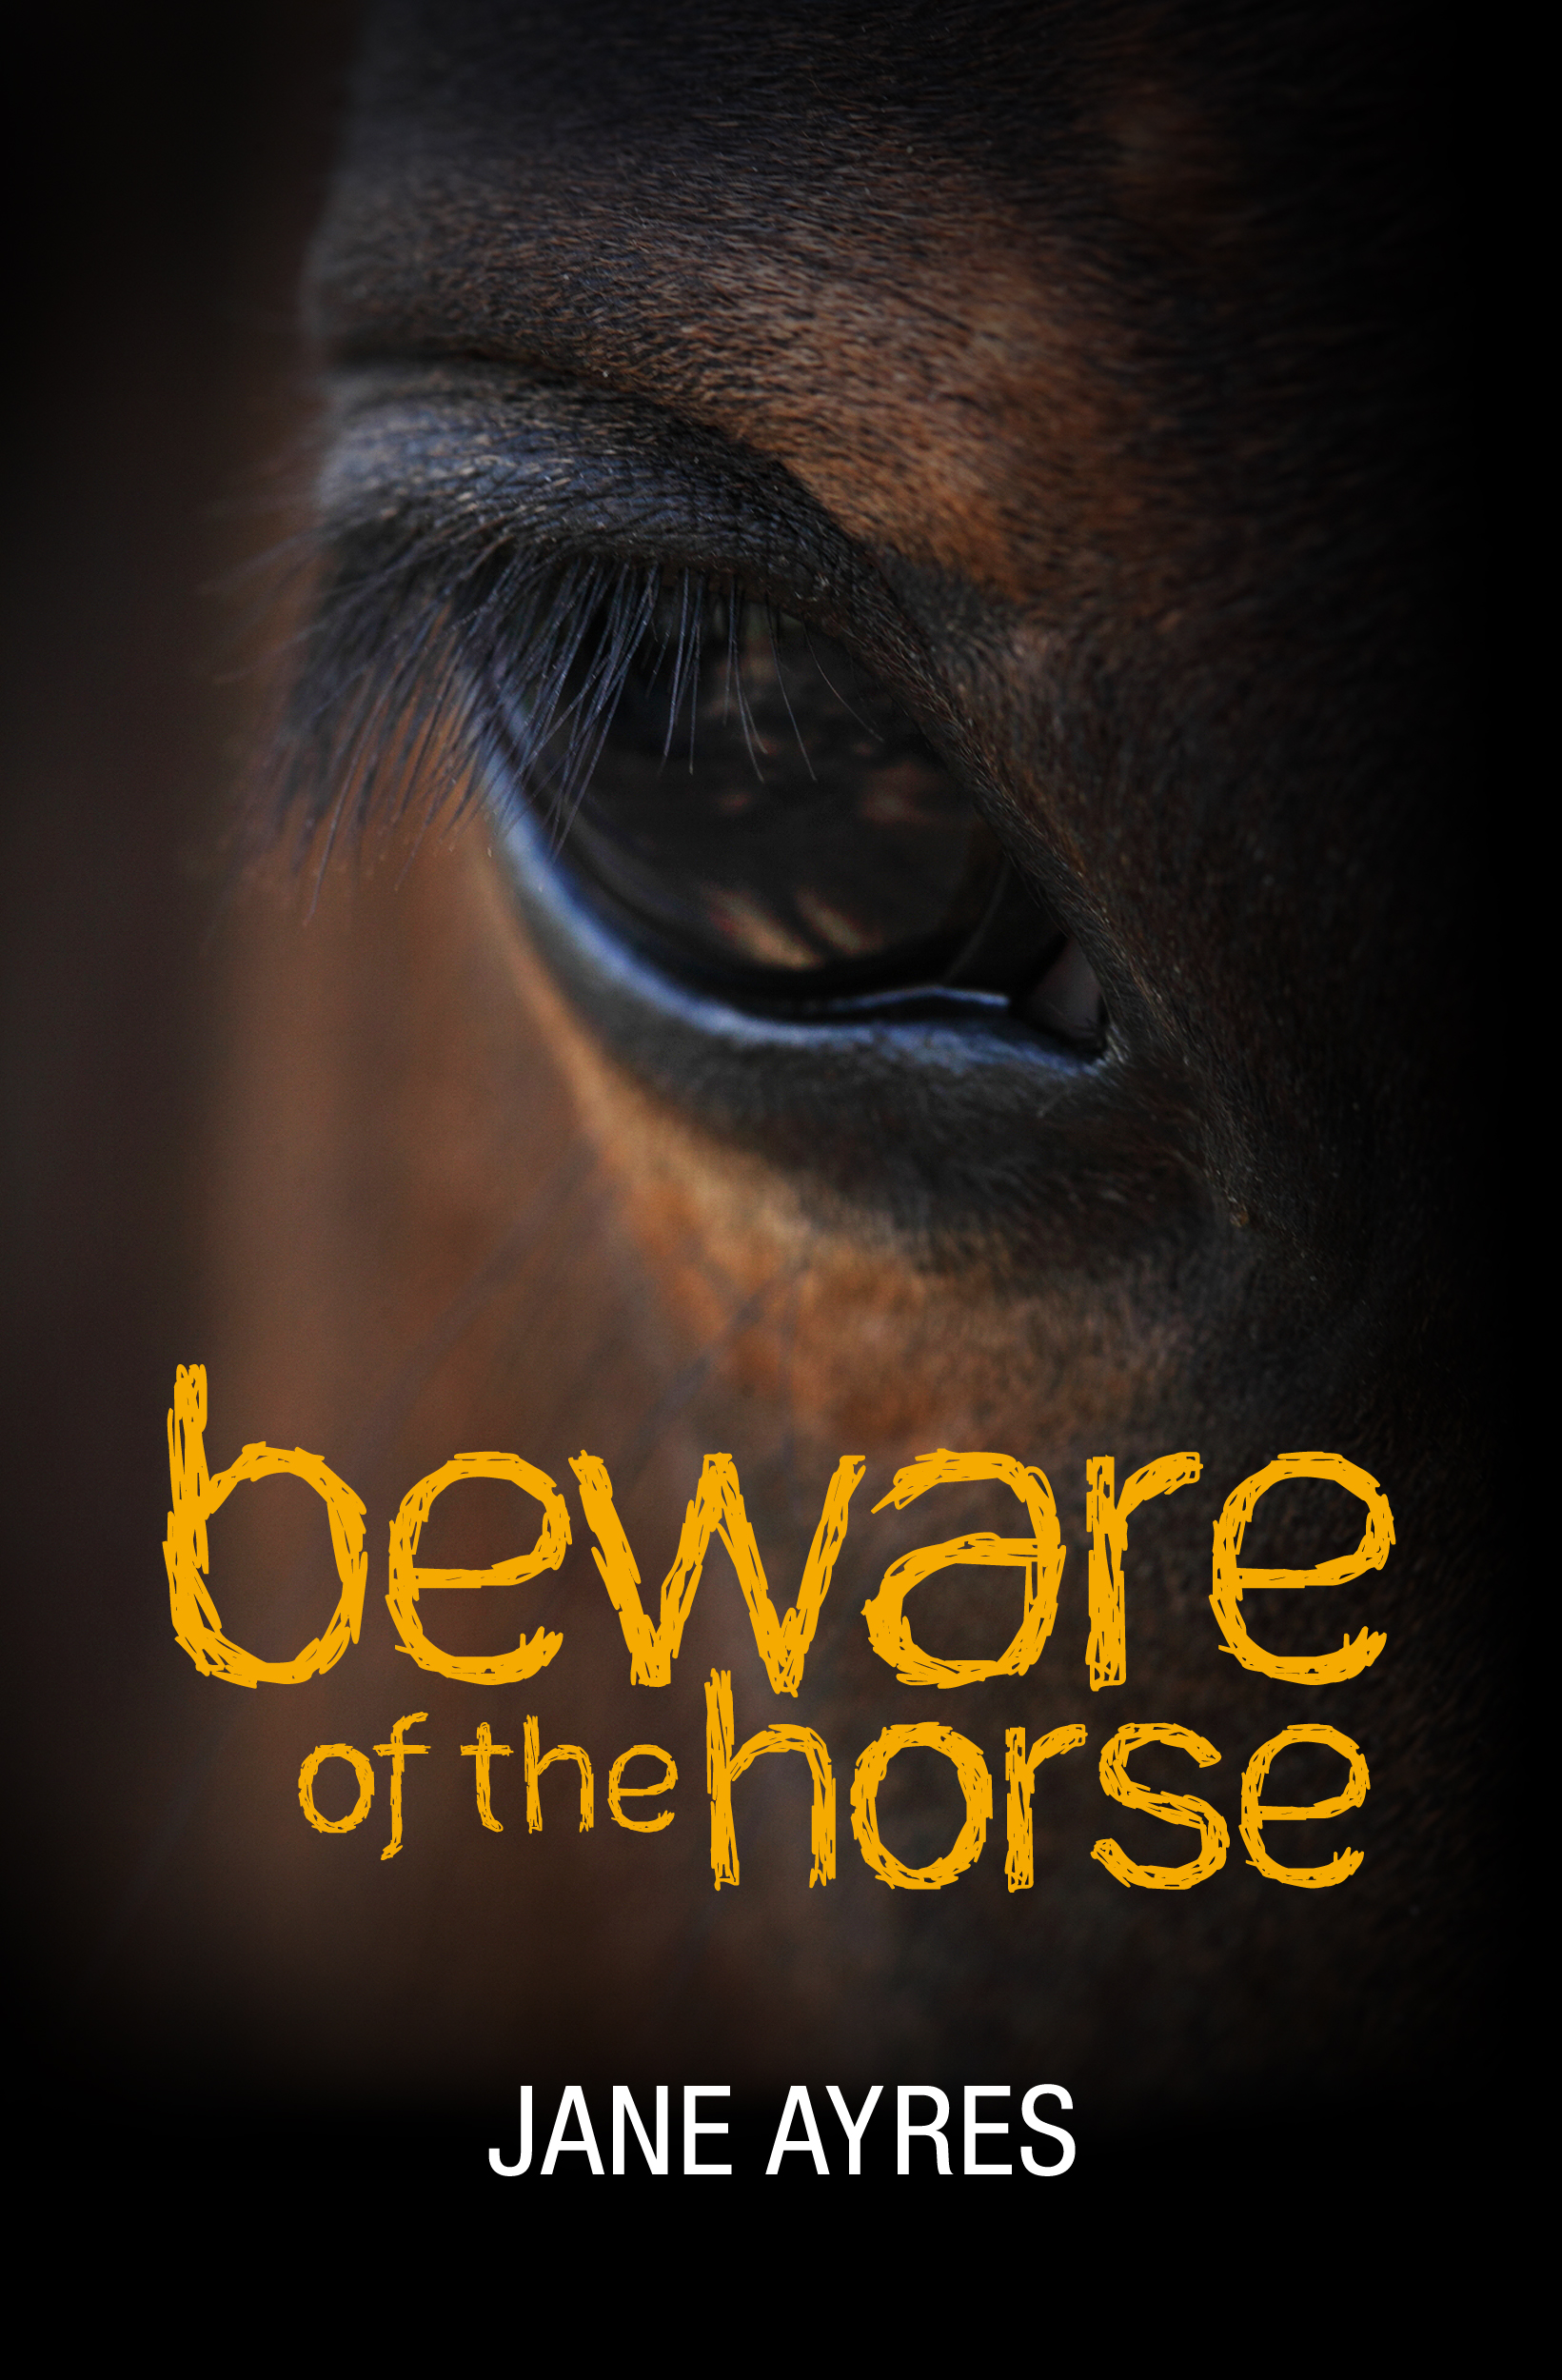  - beware-of-the-horse-4-1